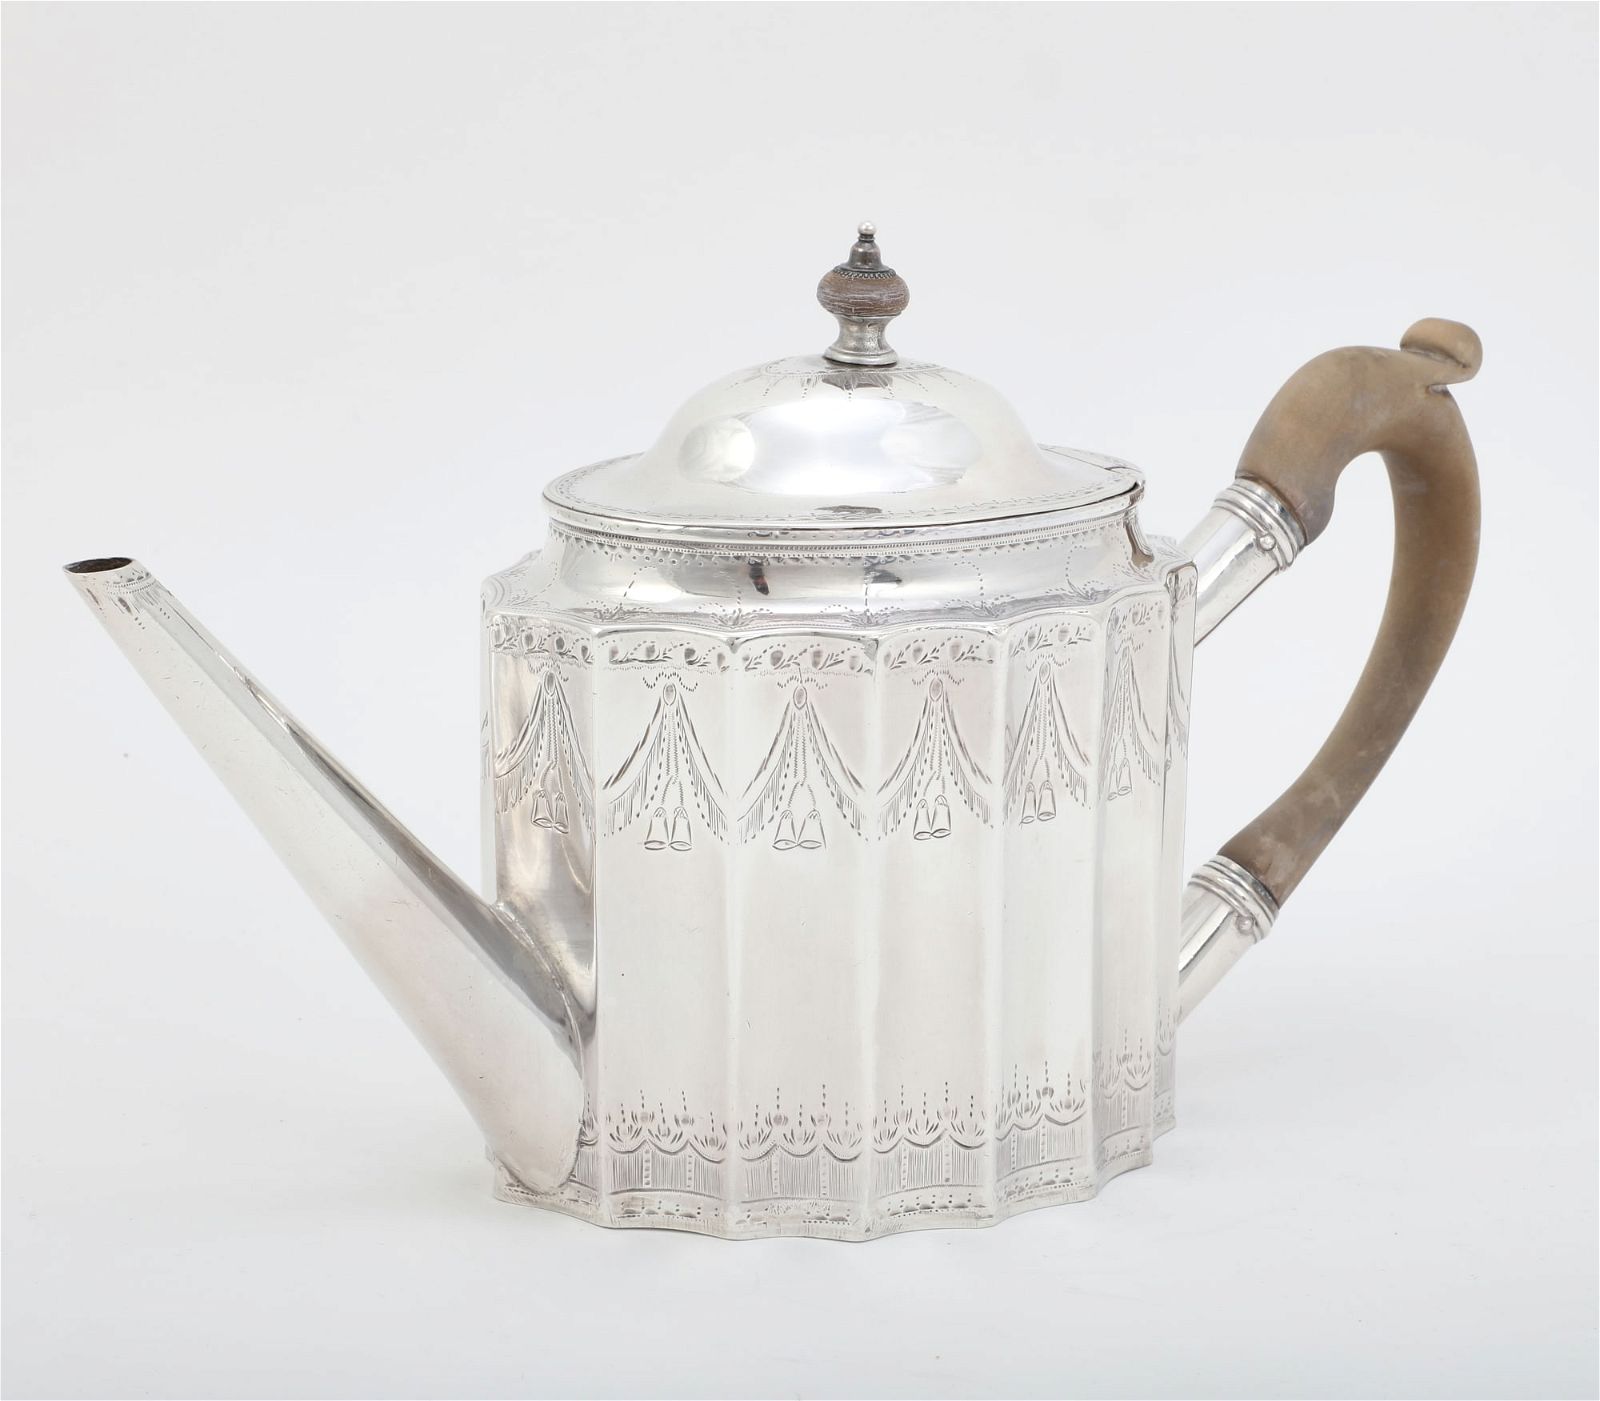 A GEORGE III STERLING SILVER TEAPOT  2fb2e9d